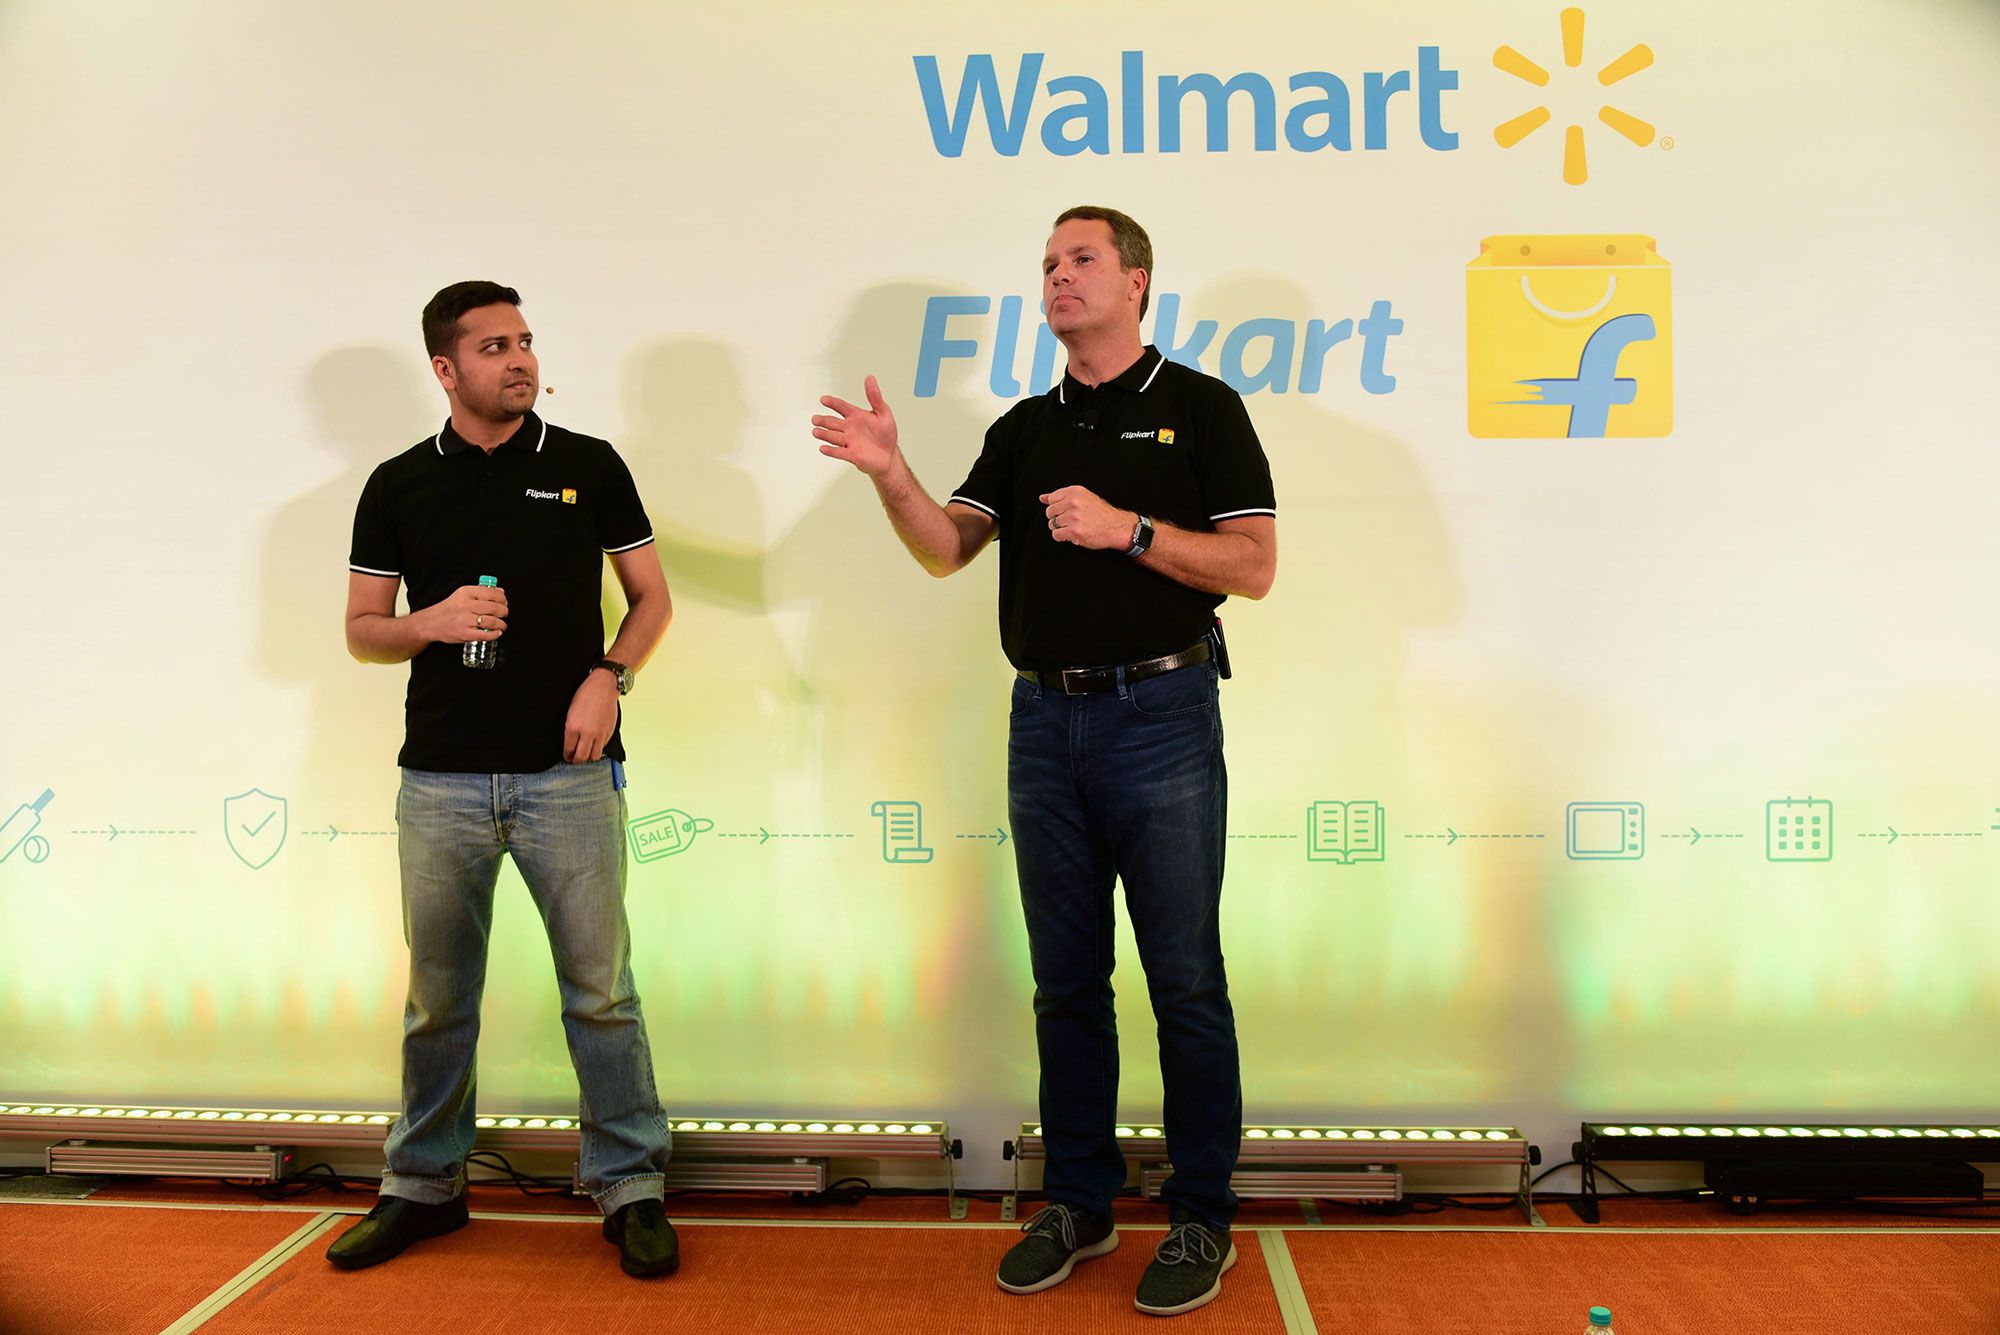 Walmart told US government India e-commerce rules regressive, warned of trade impact